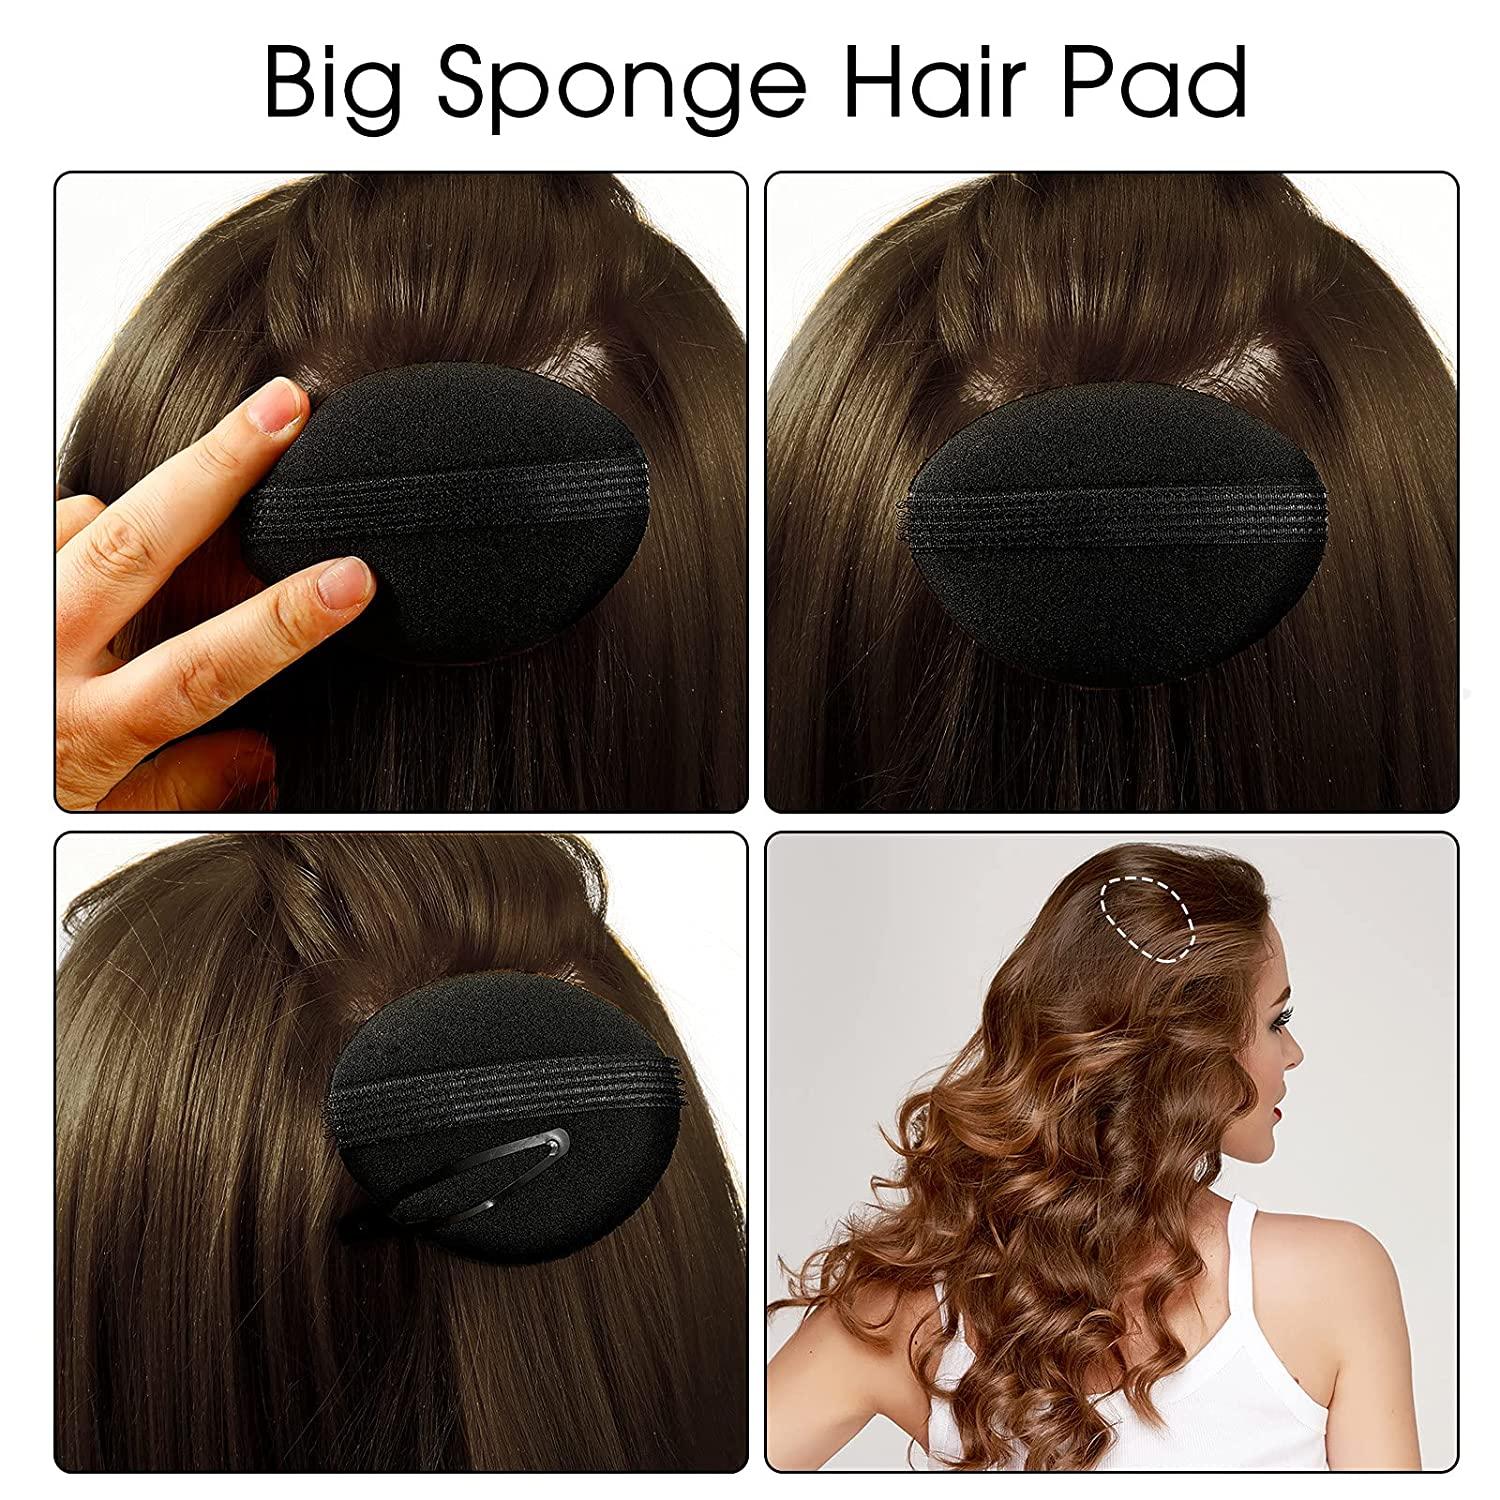 12 Pieces Hair Base Sponge Invisible Hair Clip Comb Bump It Up Volume Tool  False Hair Pads Hair Bump Styling Insert Tool Hair Extensions Accessories  (Black, Coffee, Dark Brown)